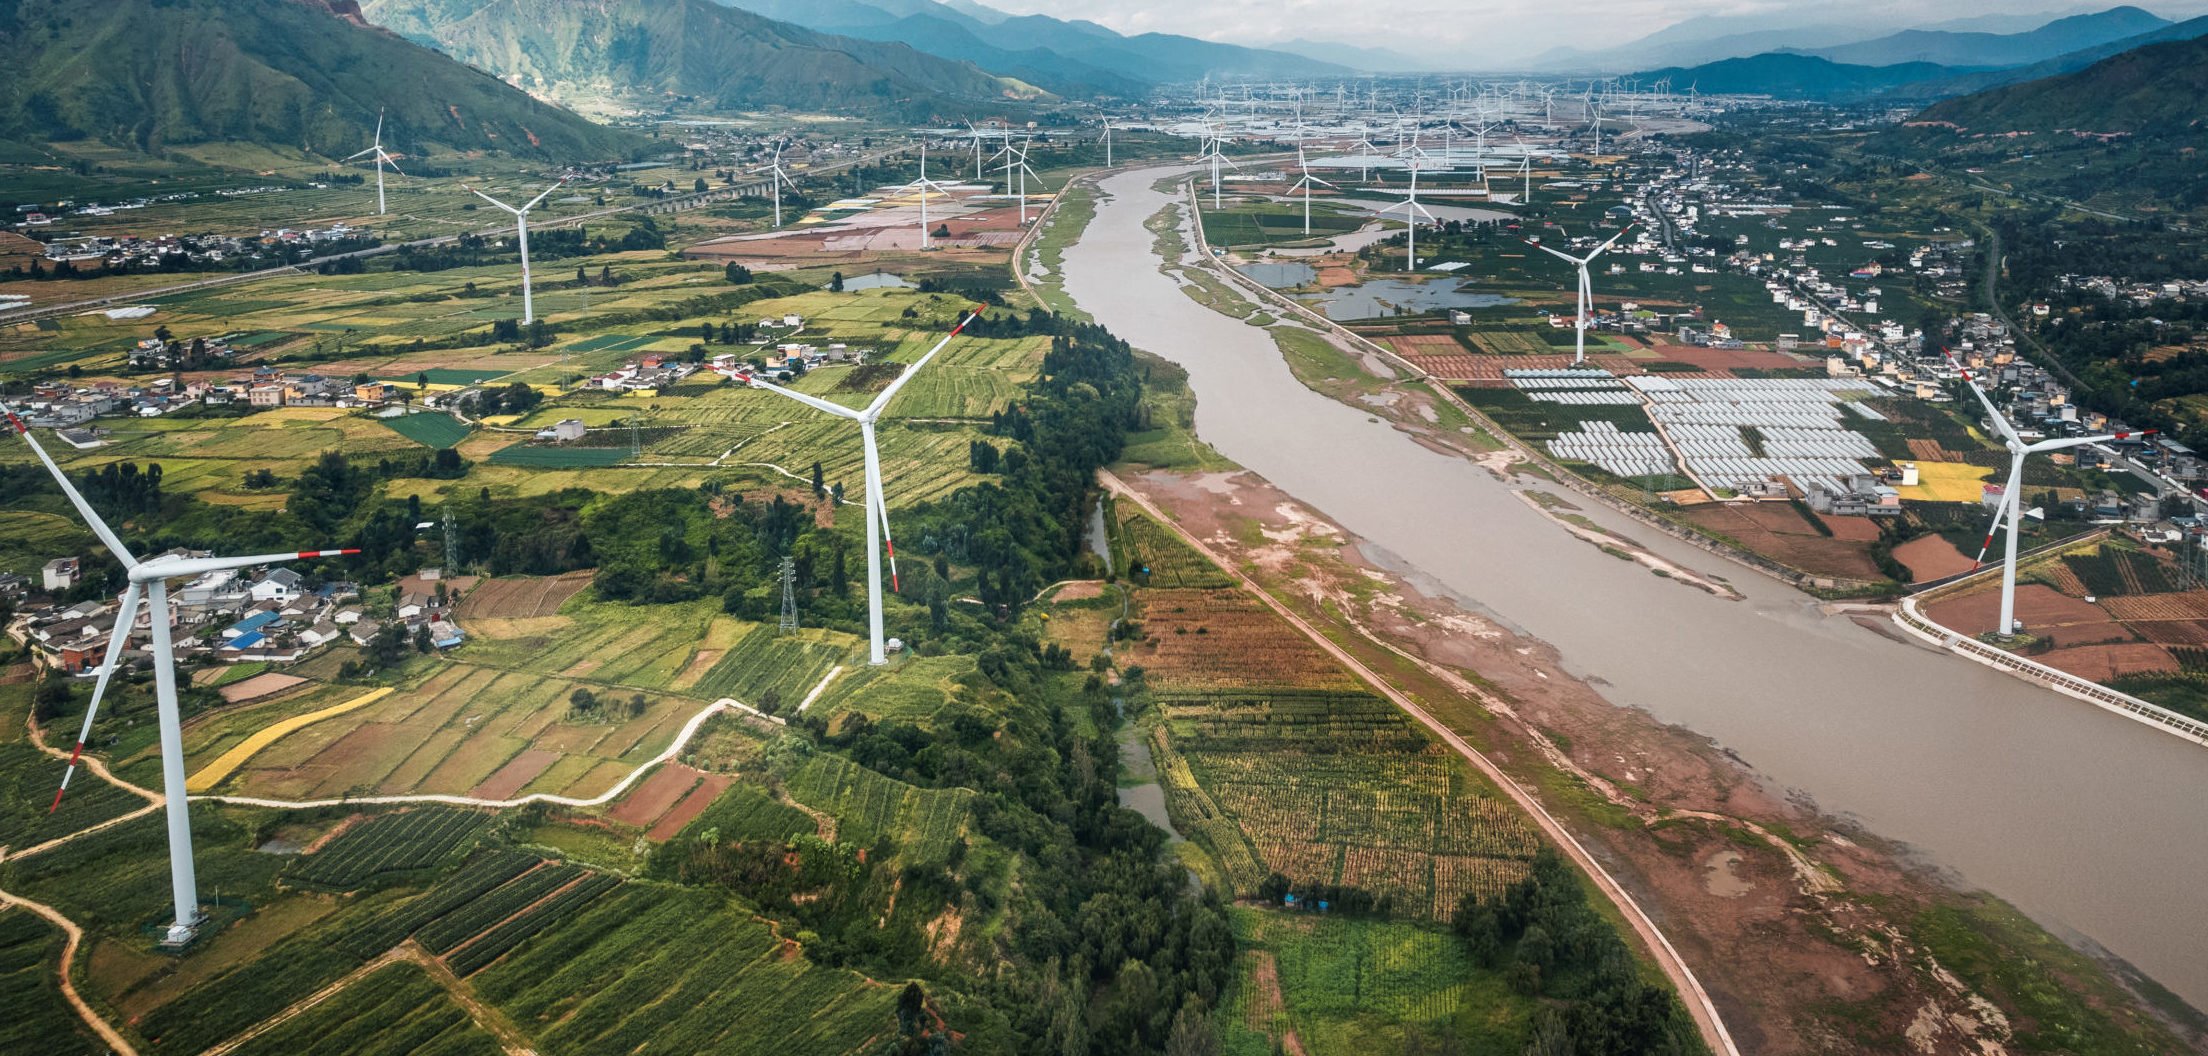 Green clean wind energy in a valley in Xichang, China